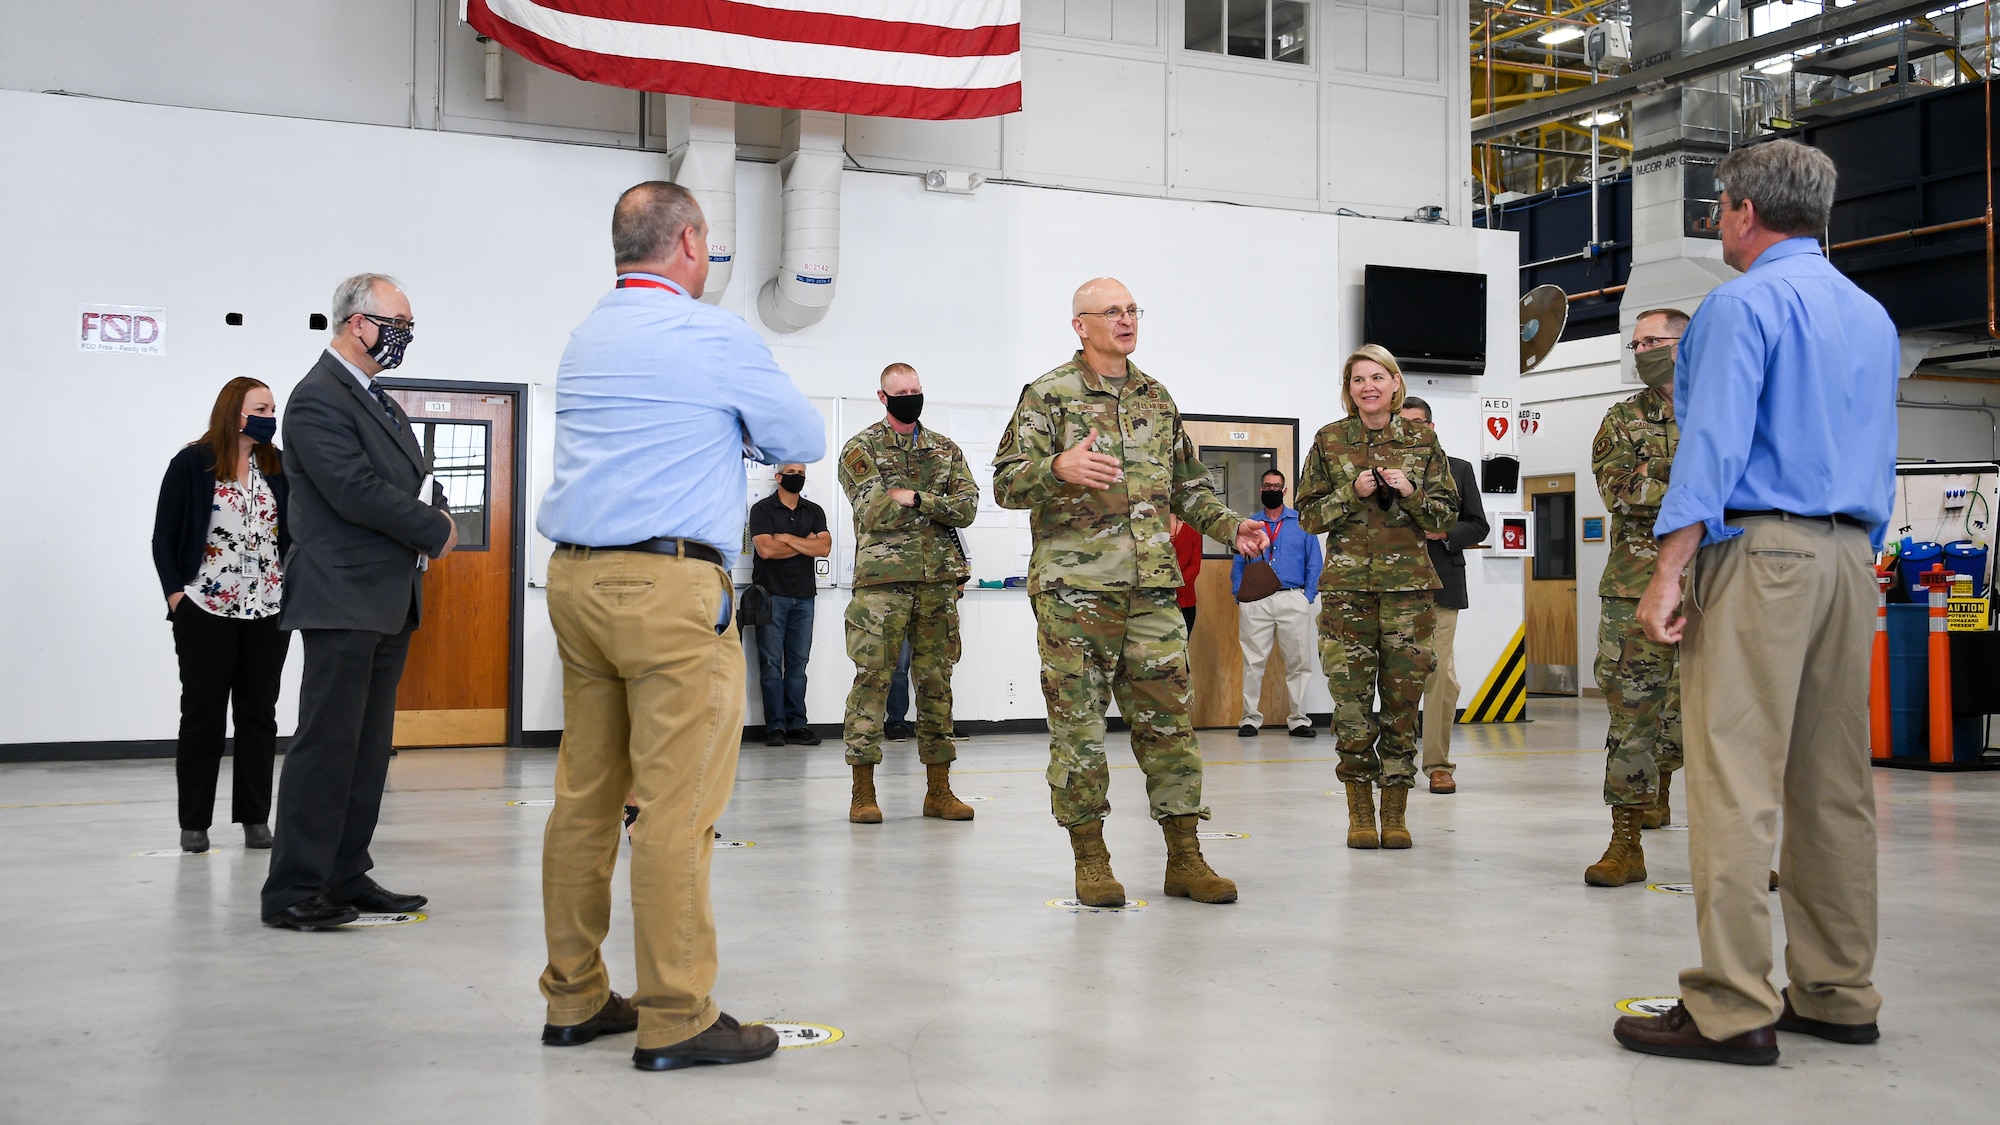 Gen. Bunch speaks with leadership standing in an aircraft maintenance hangar from the 309th Commodities Maintenance Group.